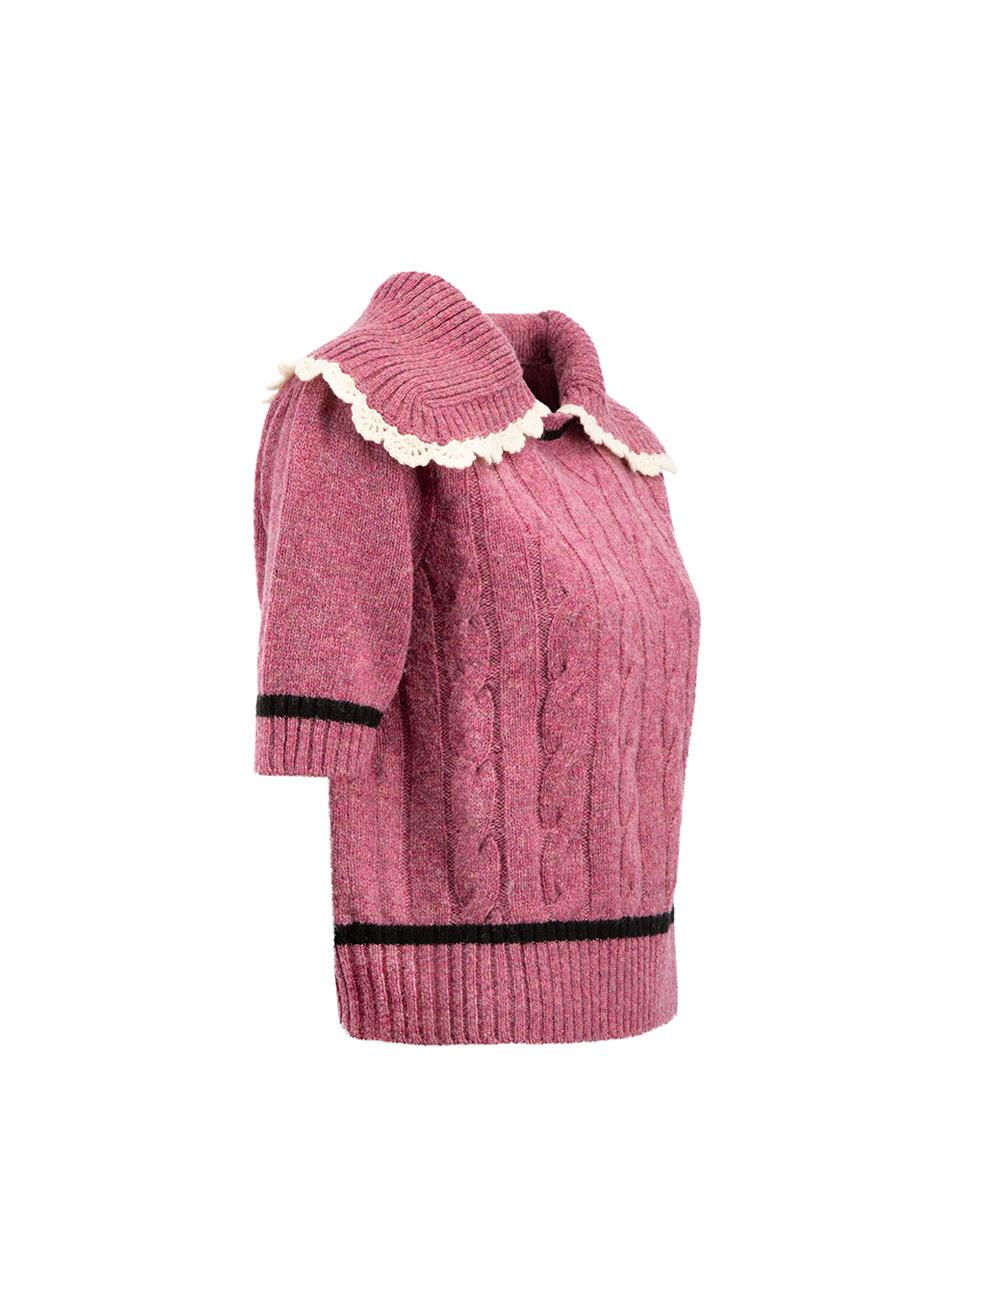 CONDITION is Very good. Hardly any visible wear to top is evident on this used Miu Miu designer resale item.



Details


Pink

Wool

Top

Cable knit

Short sleeves

Large collar





Made in Italy 



Composition

100% Wool



Care instructions: